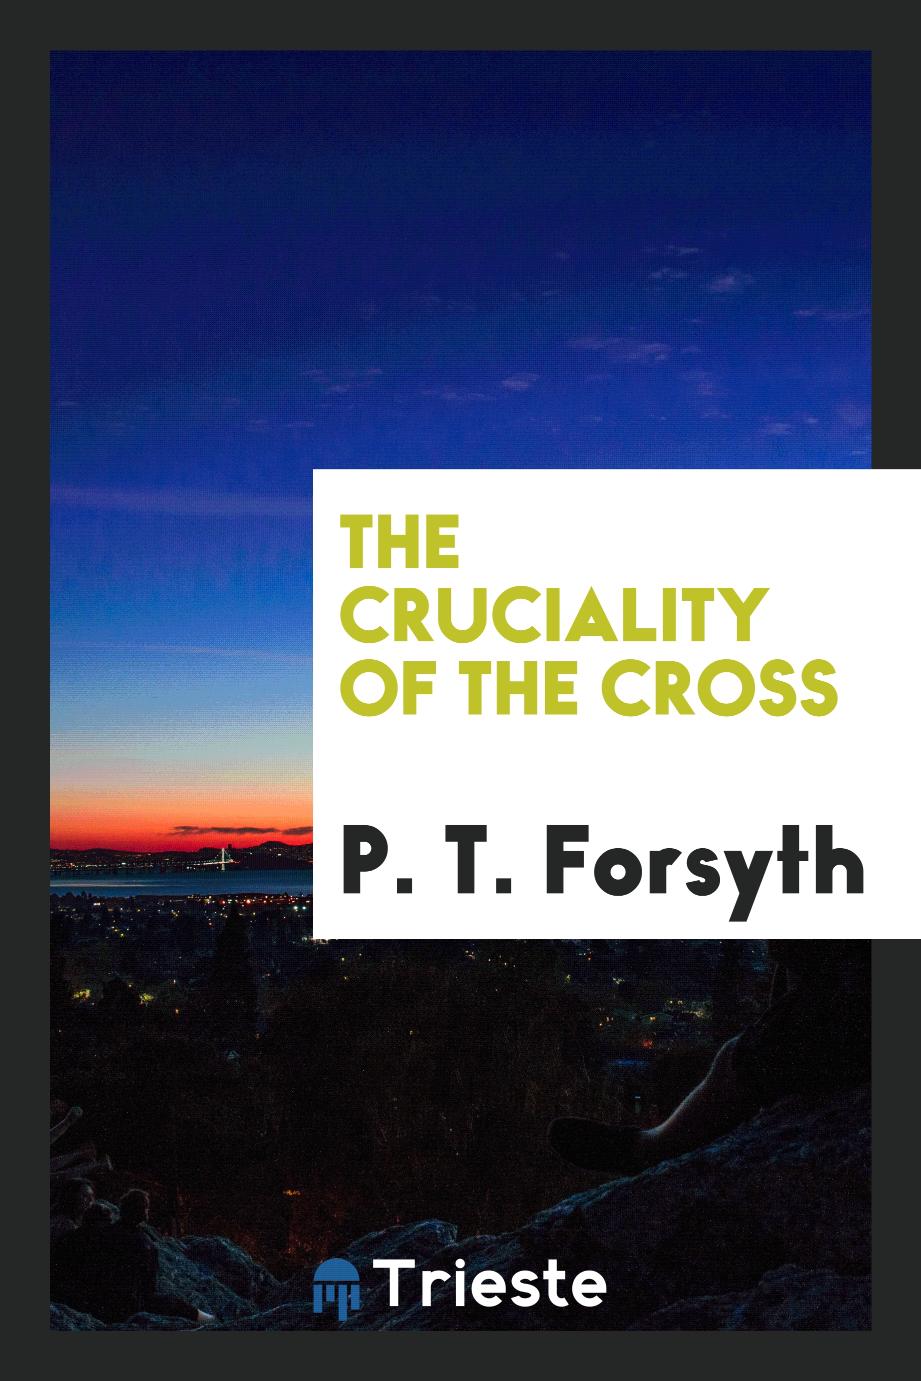 The cruciality of the cross